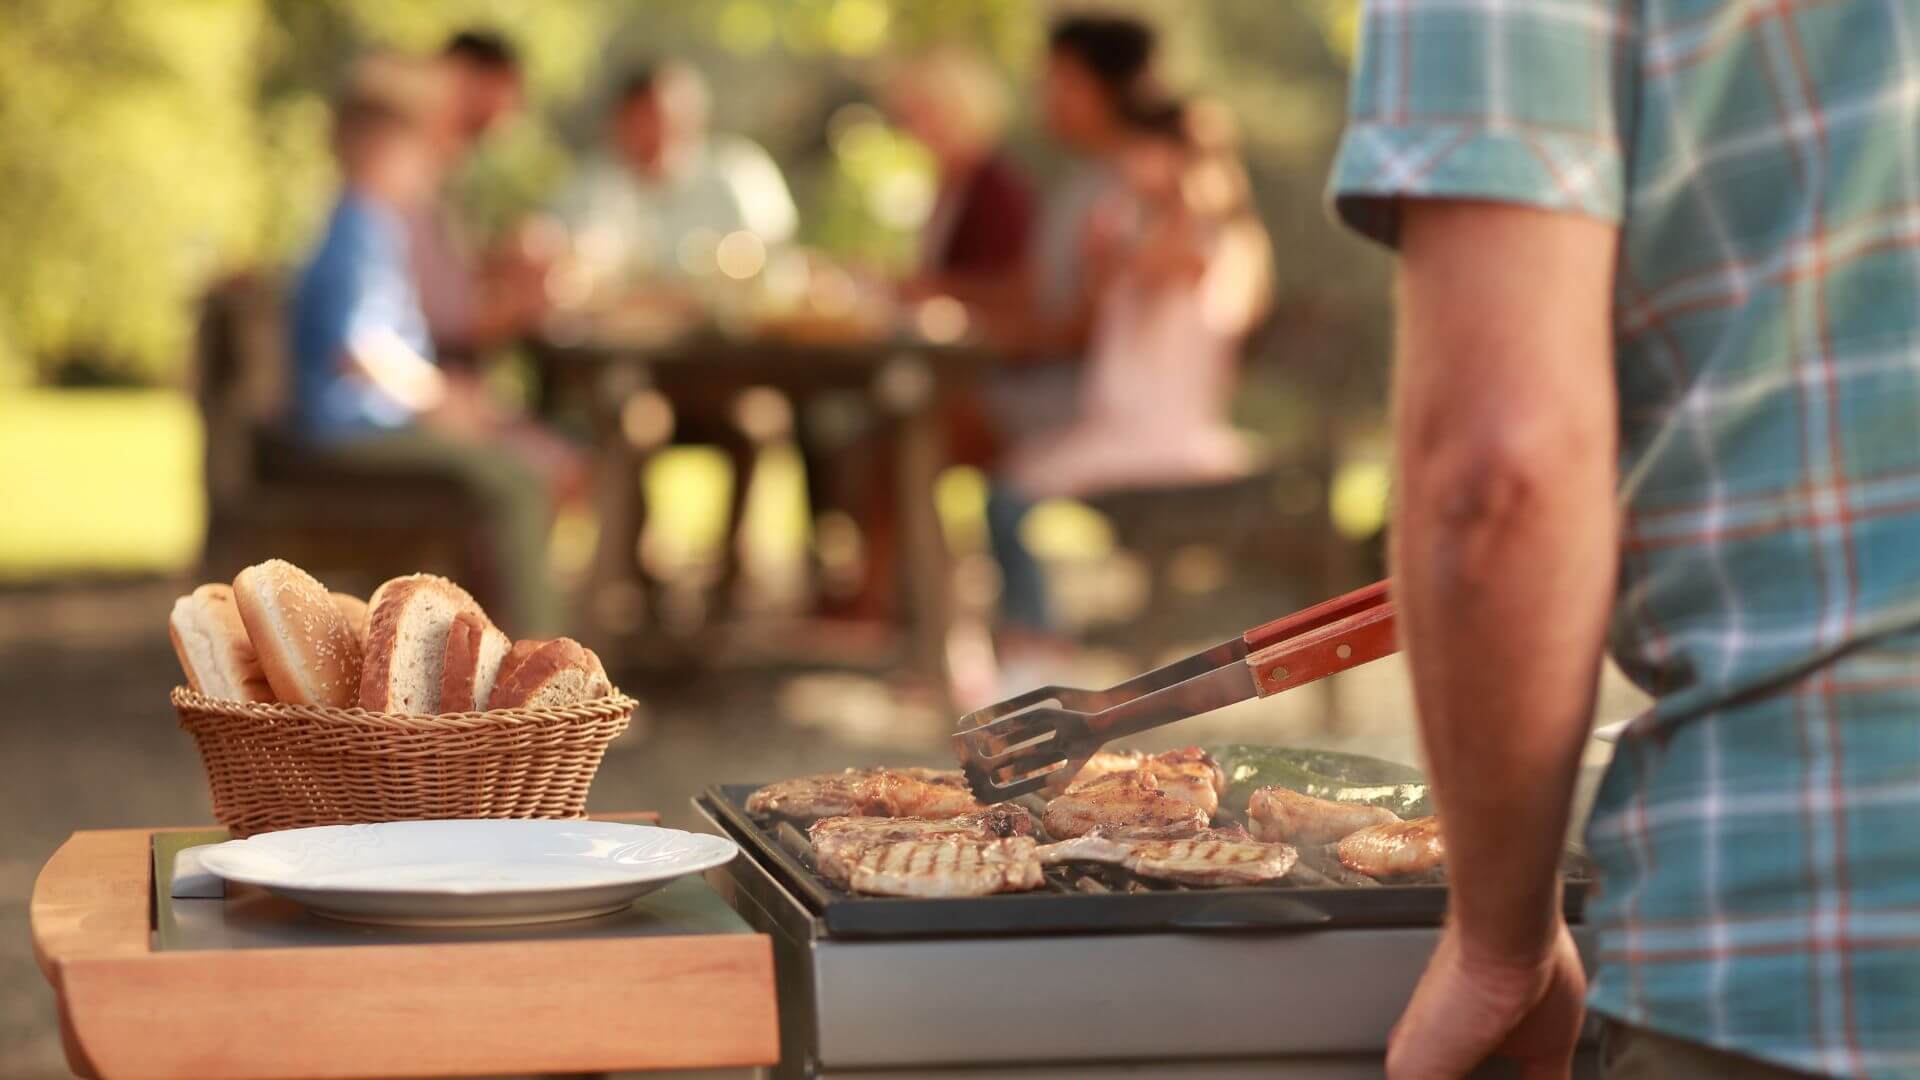 Common Grilling Mistakes and How to Avoid Them